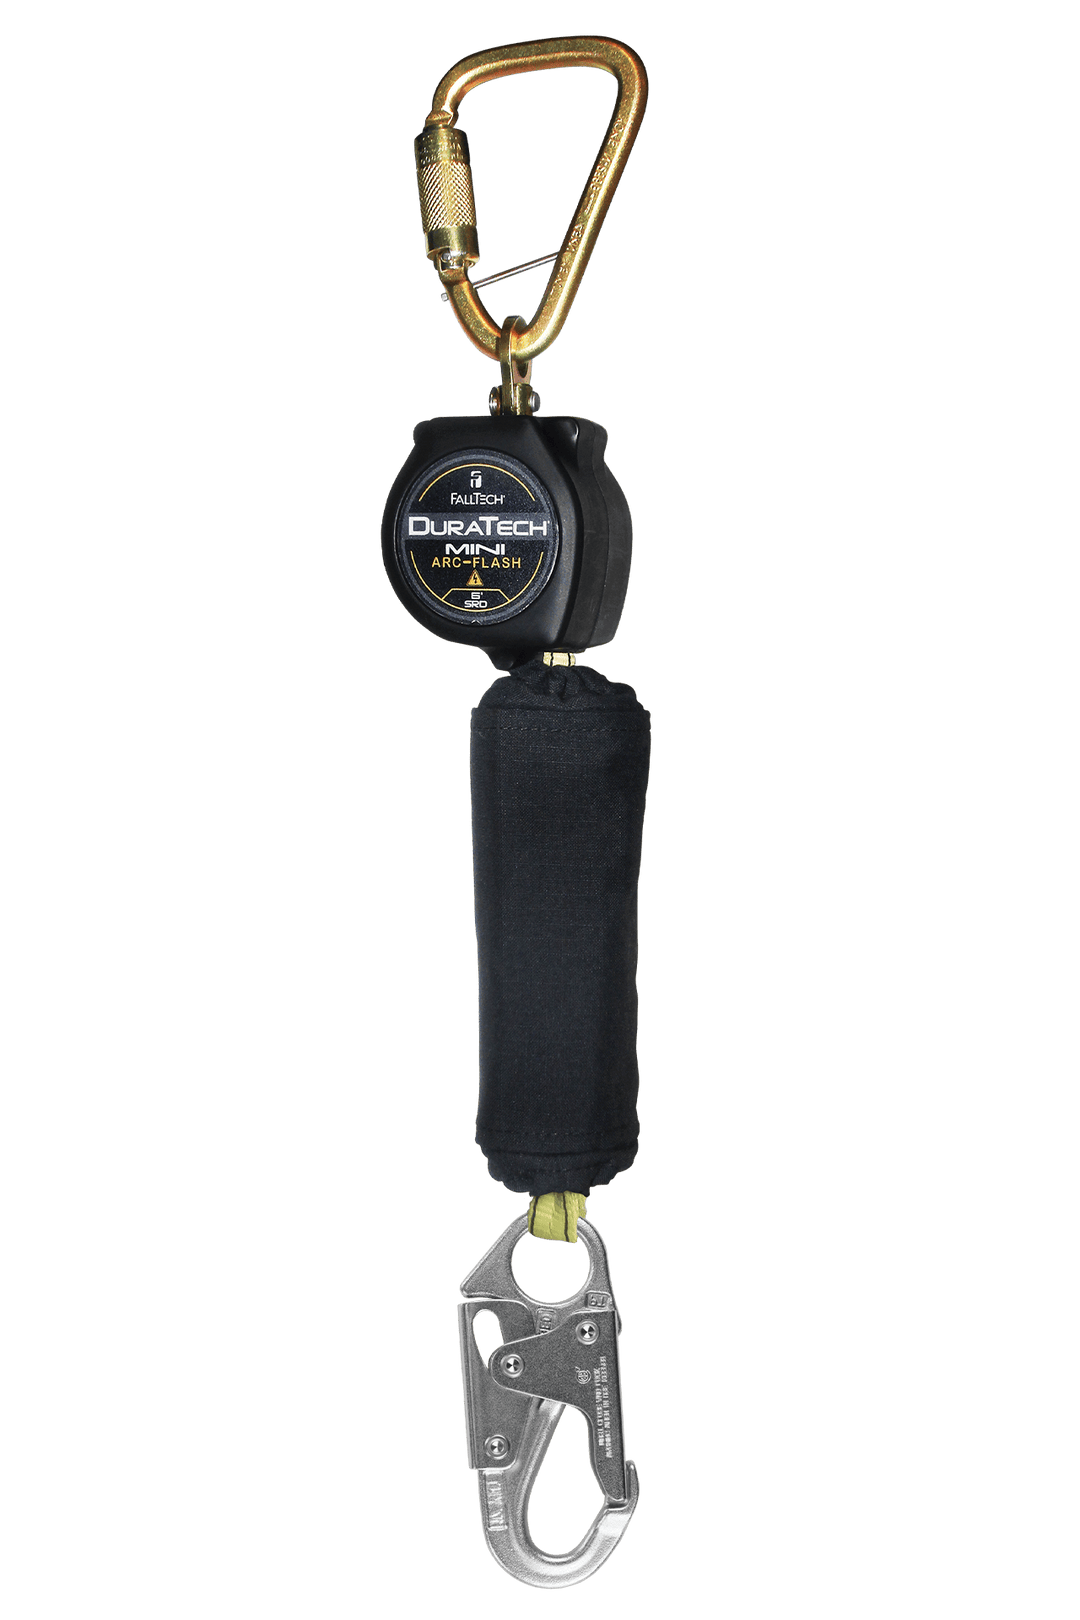 FALLTECH 6' Arc Flash DURATECH® Mini Class 1 Personal SRL-P w/ Steel Snap Hook, Includes Steel Dorsal Connecting Carabiner